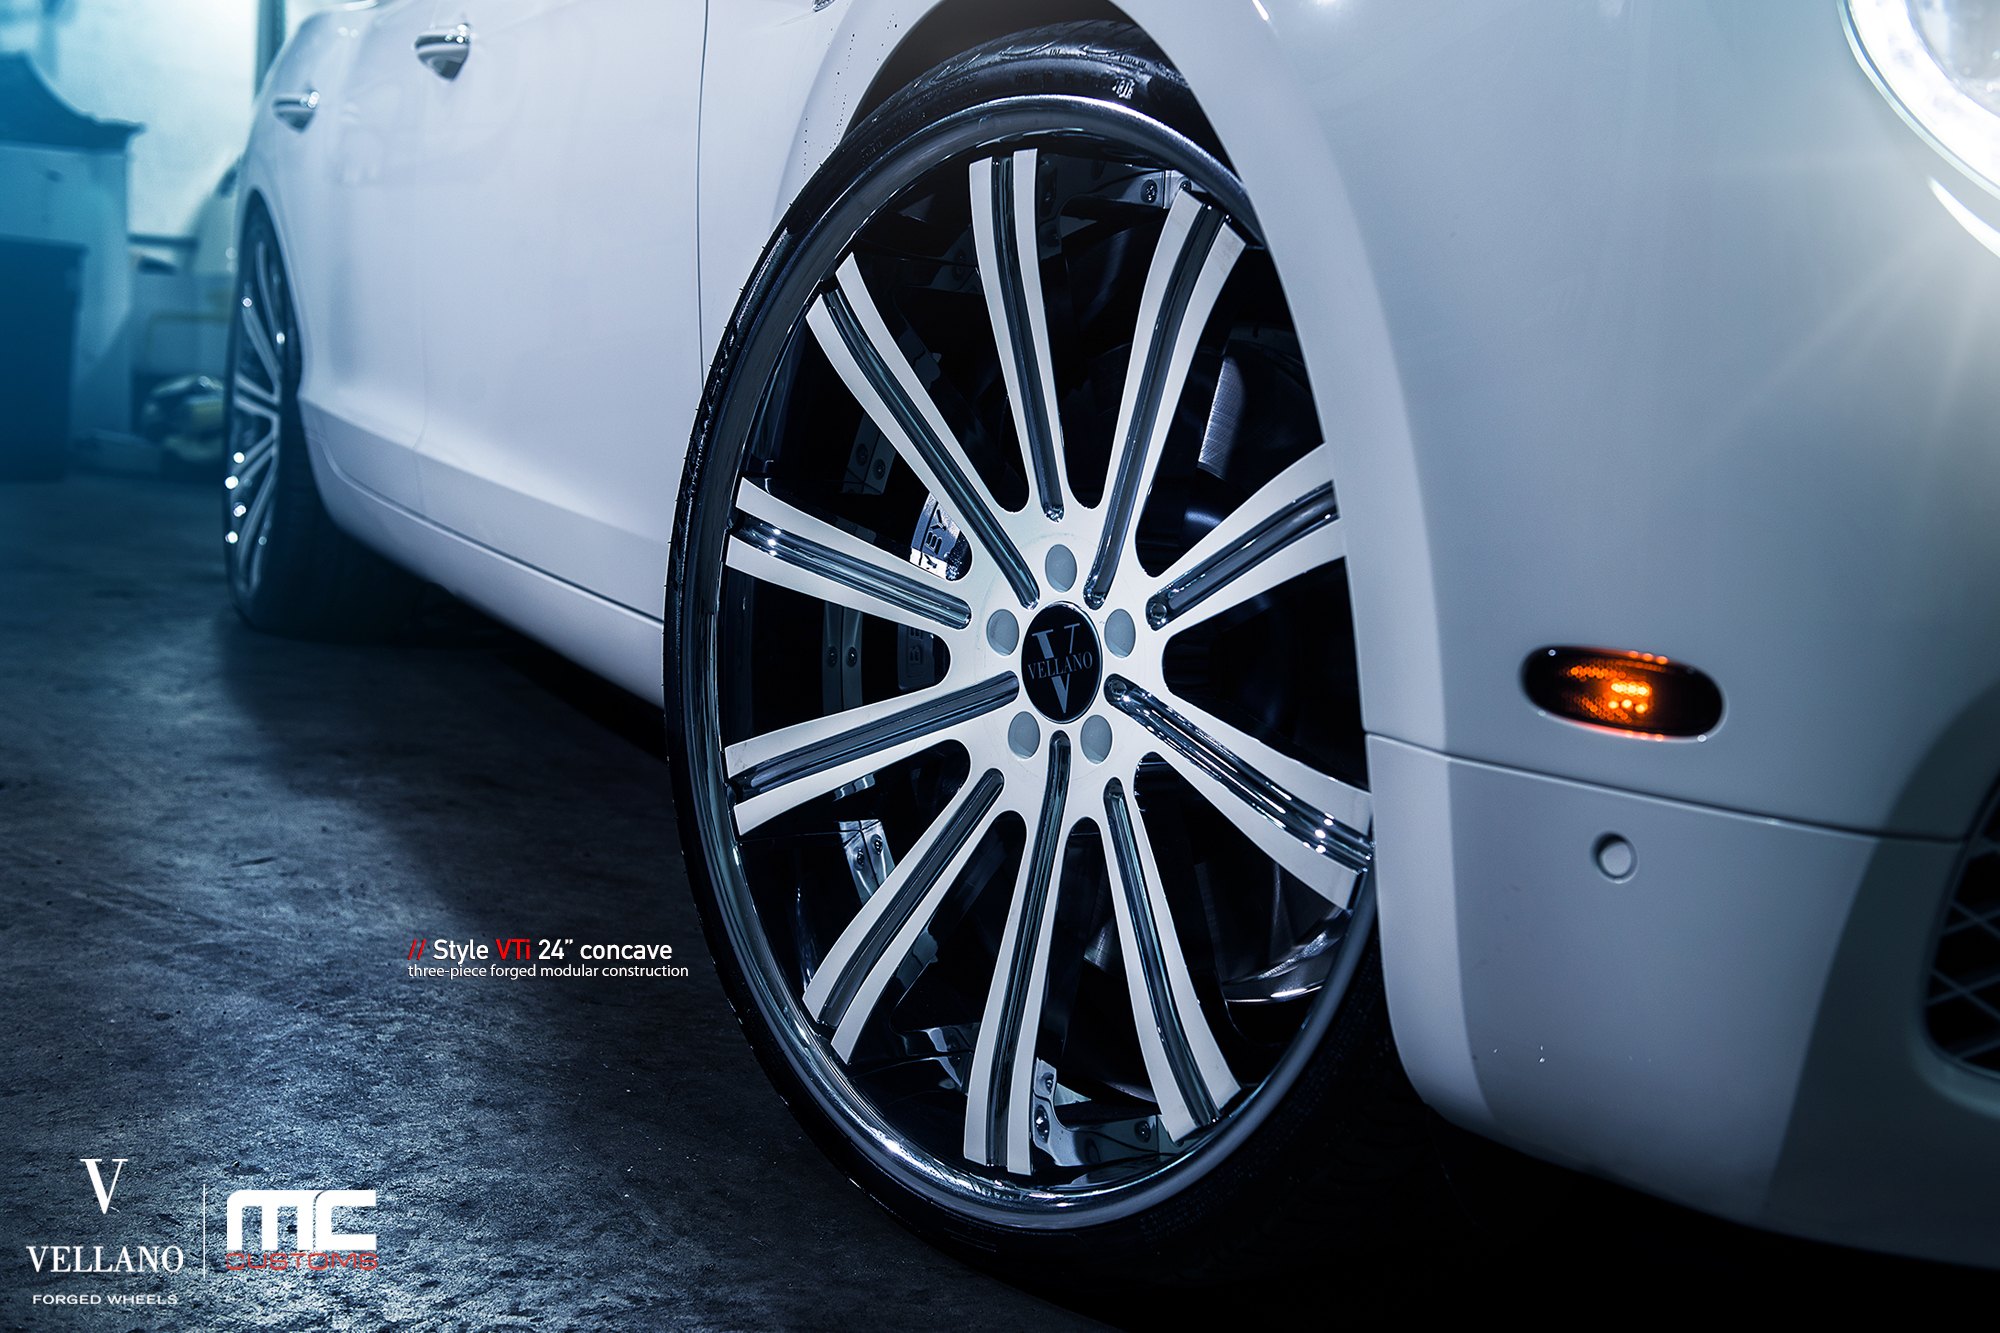 White Bently Flying Spur with 24 Inch Vellano Rims - Photo by Vellano